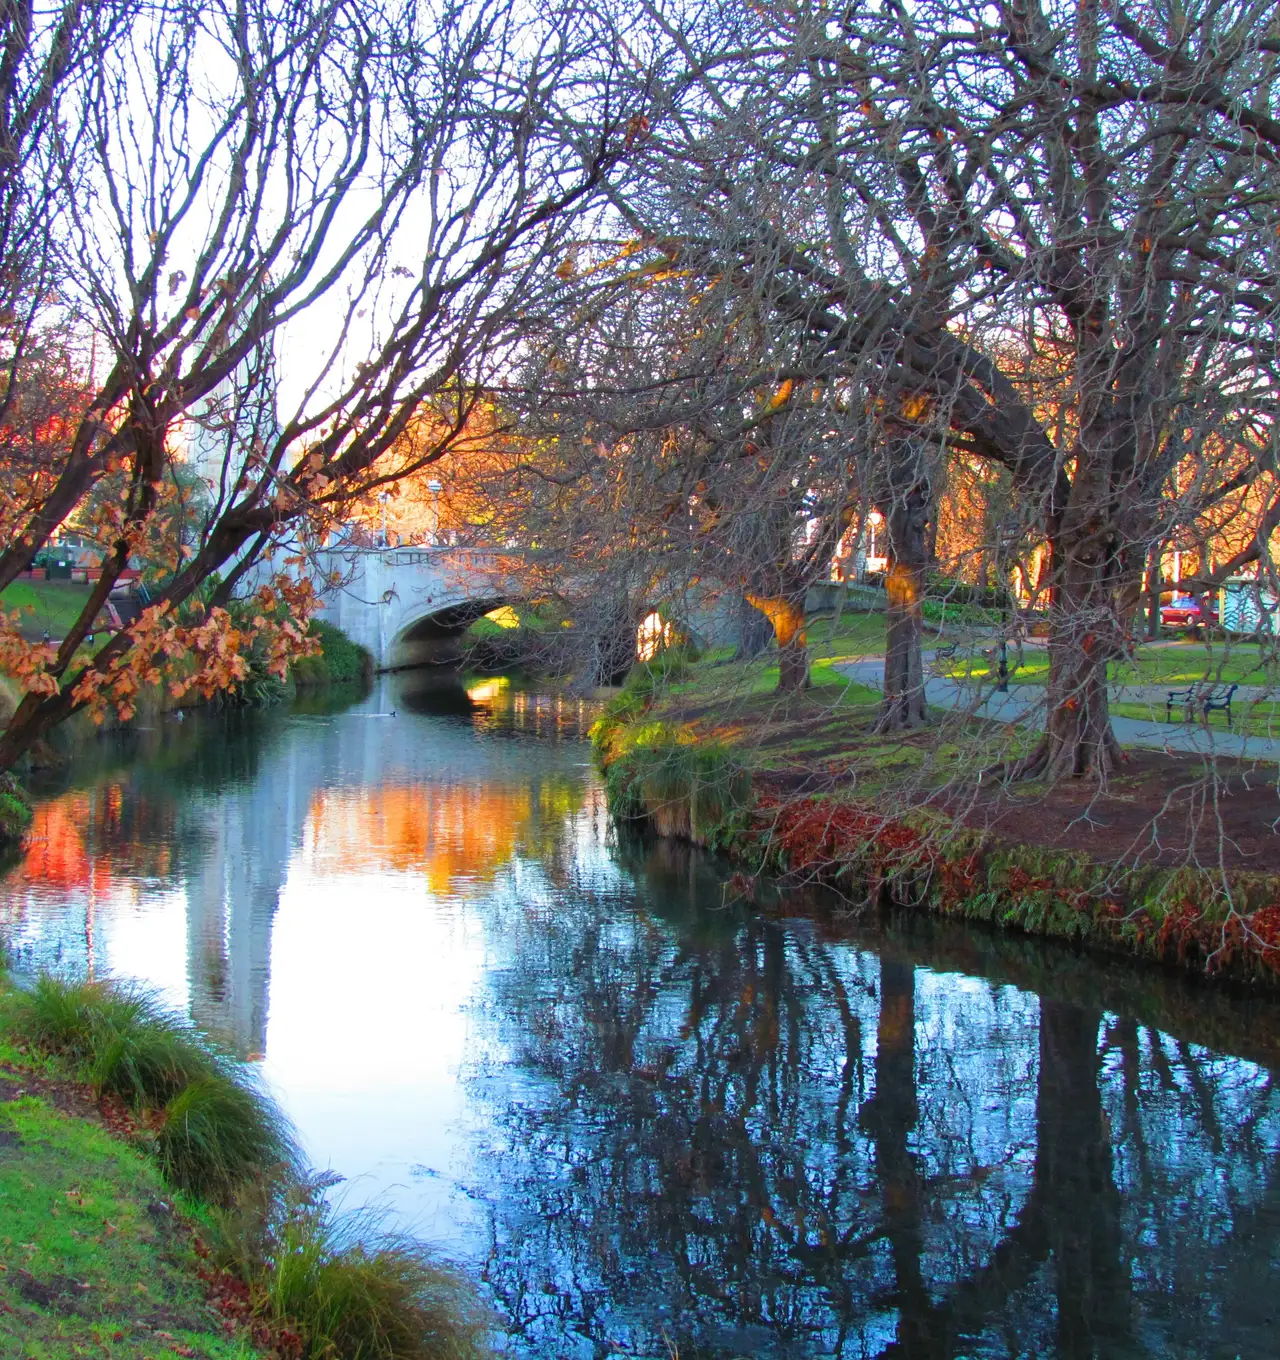 The Avon river in central Christchurch